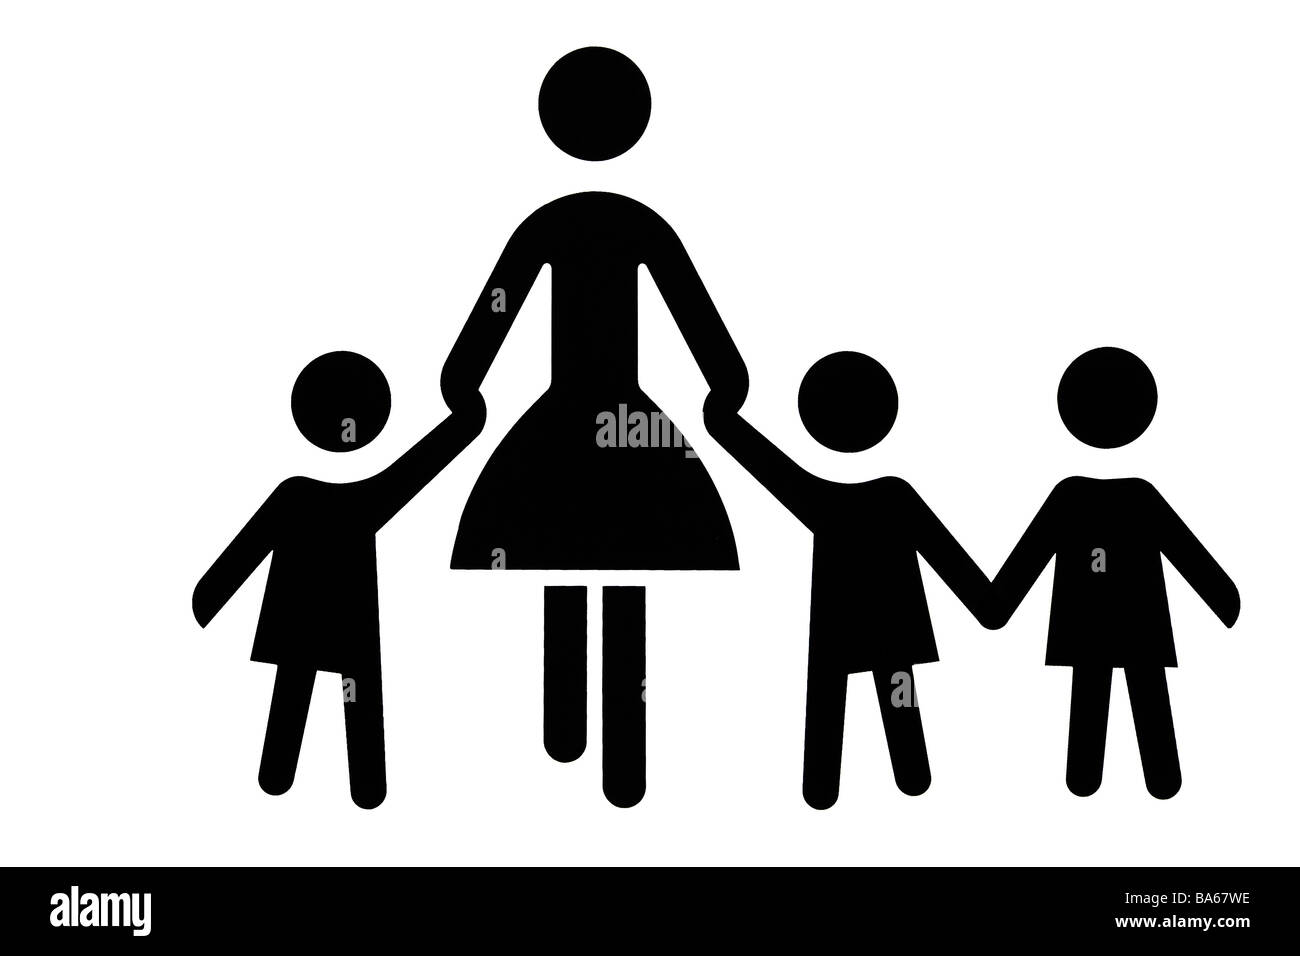 mother and children symbol